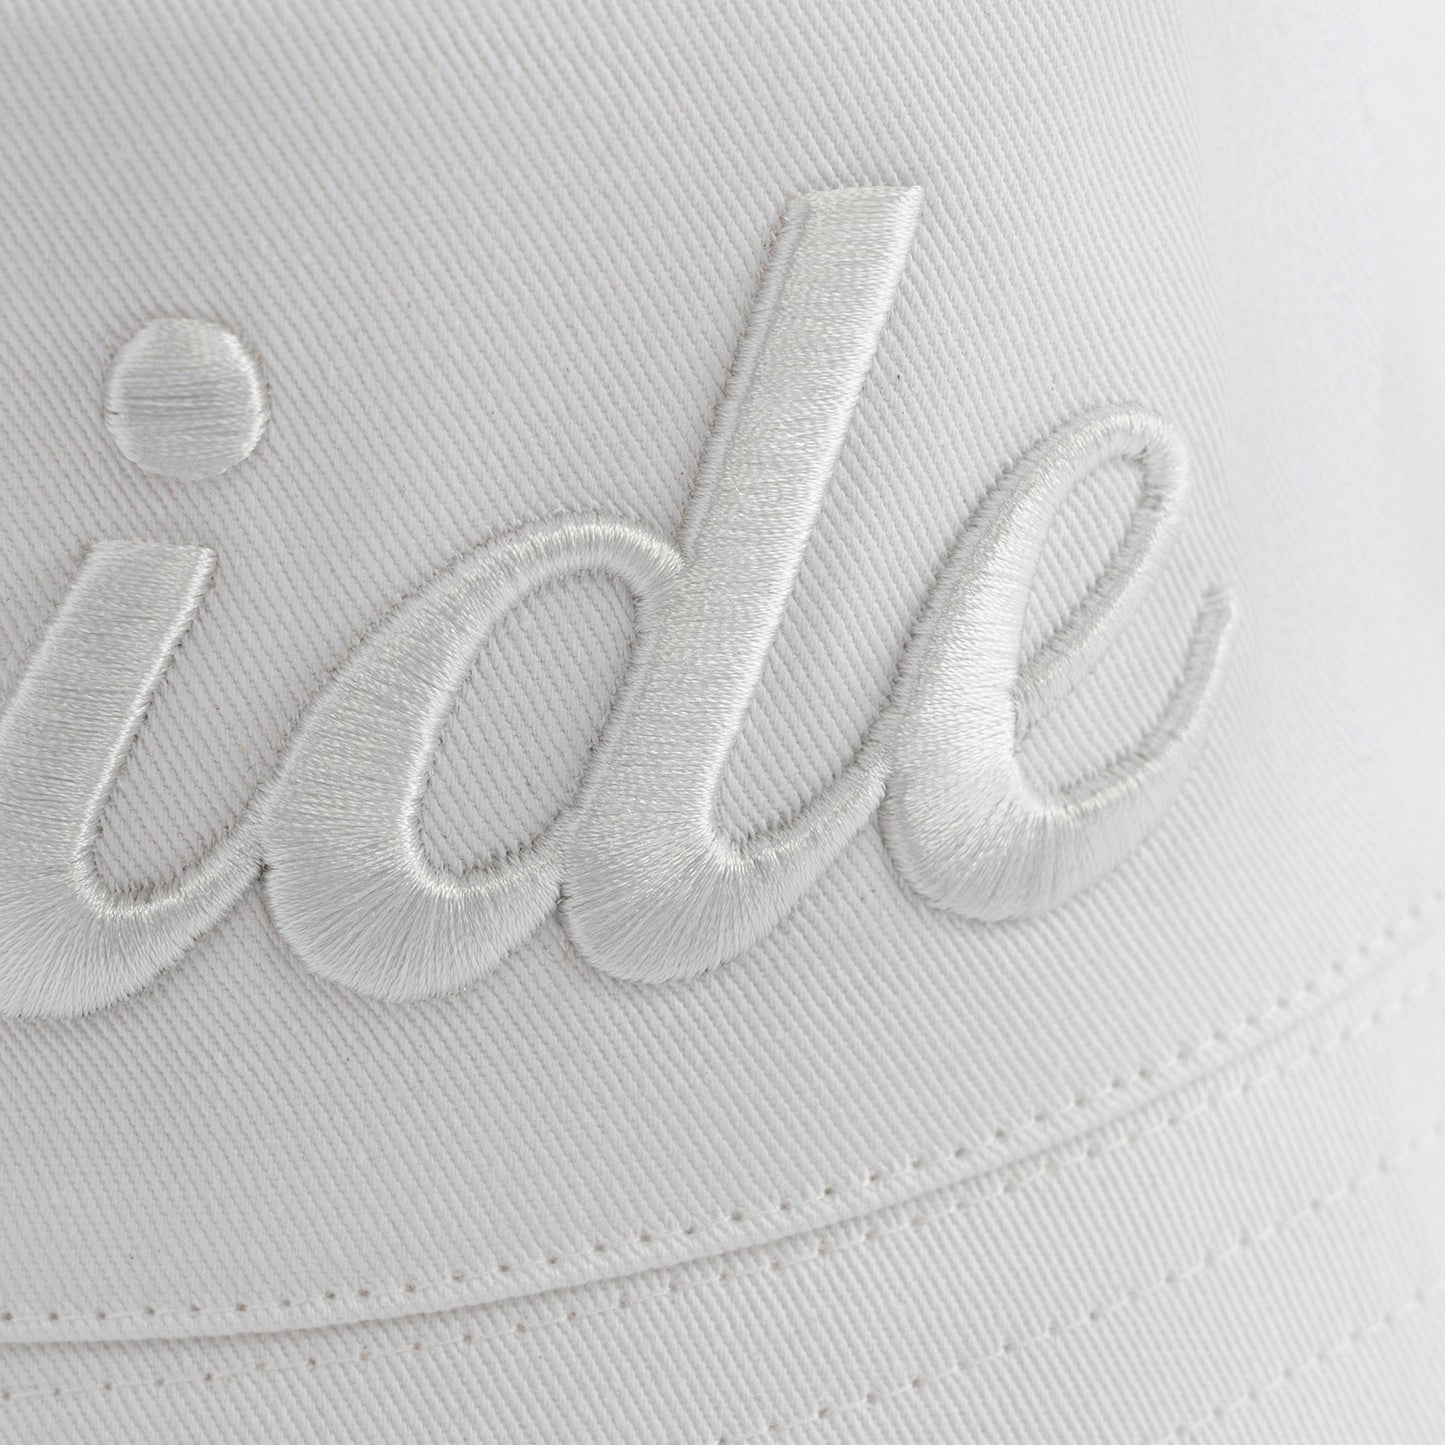 White-on-white embroidered Bride Bucket Hat, made of 100% cotton twill.